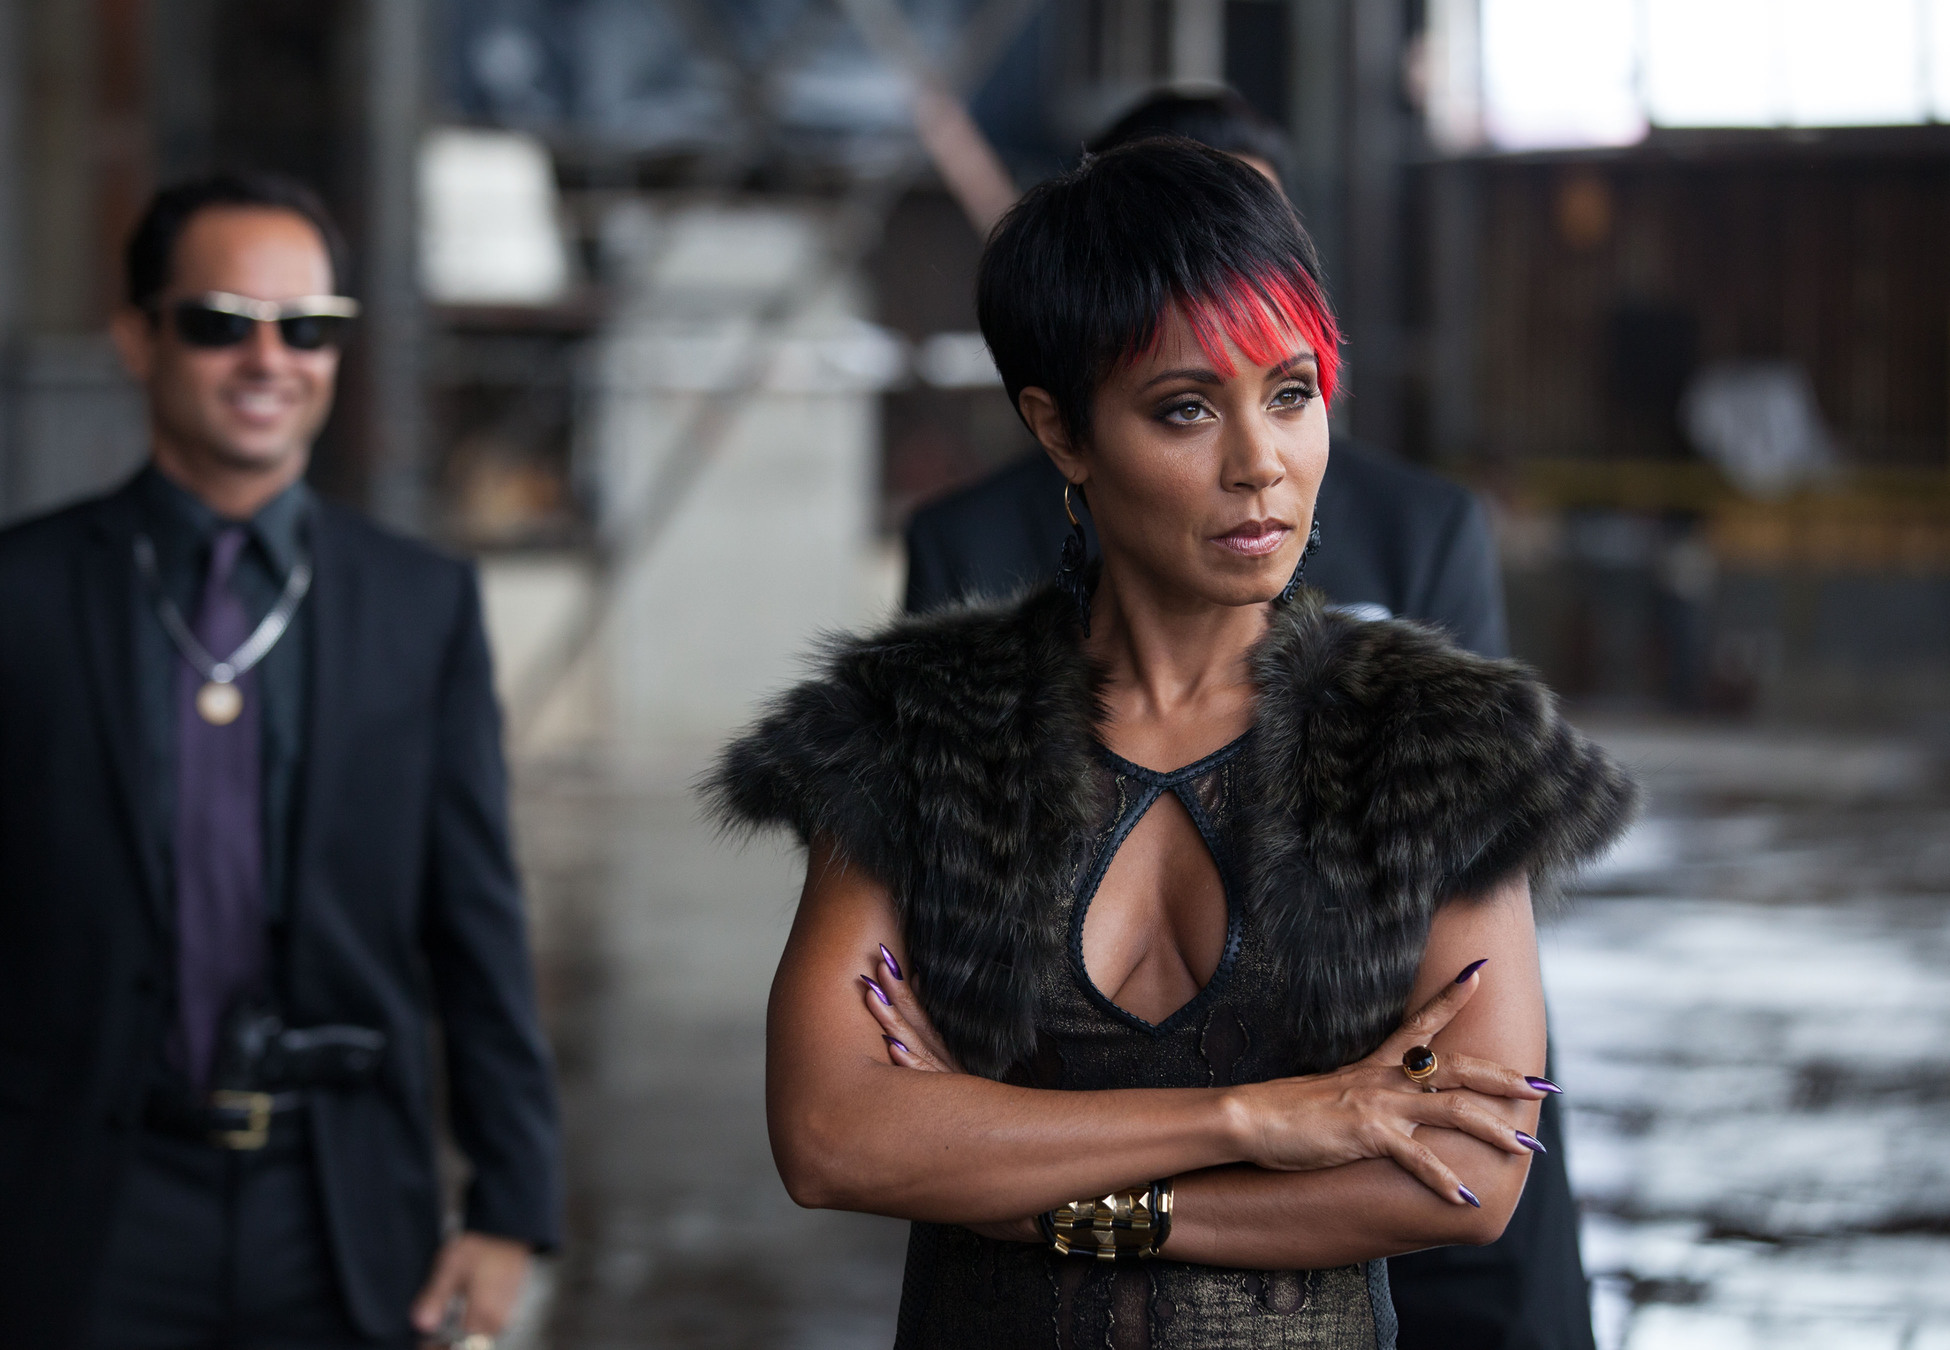 GOTHAM: Fish (Jada Pinkett Smith) meets with business associates in the "Viper" episode of GOTHAM airing Monday, Oct. 20 (8:00-9:00 PM ET/PT) on FOX. Â©2014 Fox Broadcasting Co. Cr: Jessica Miglio/FOX